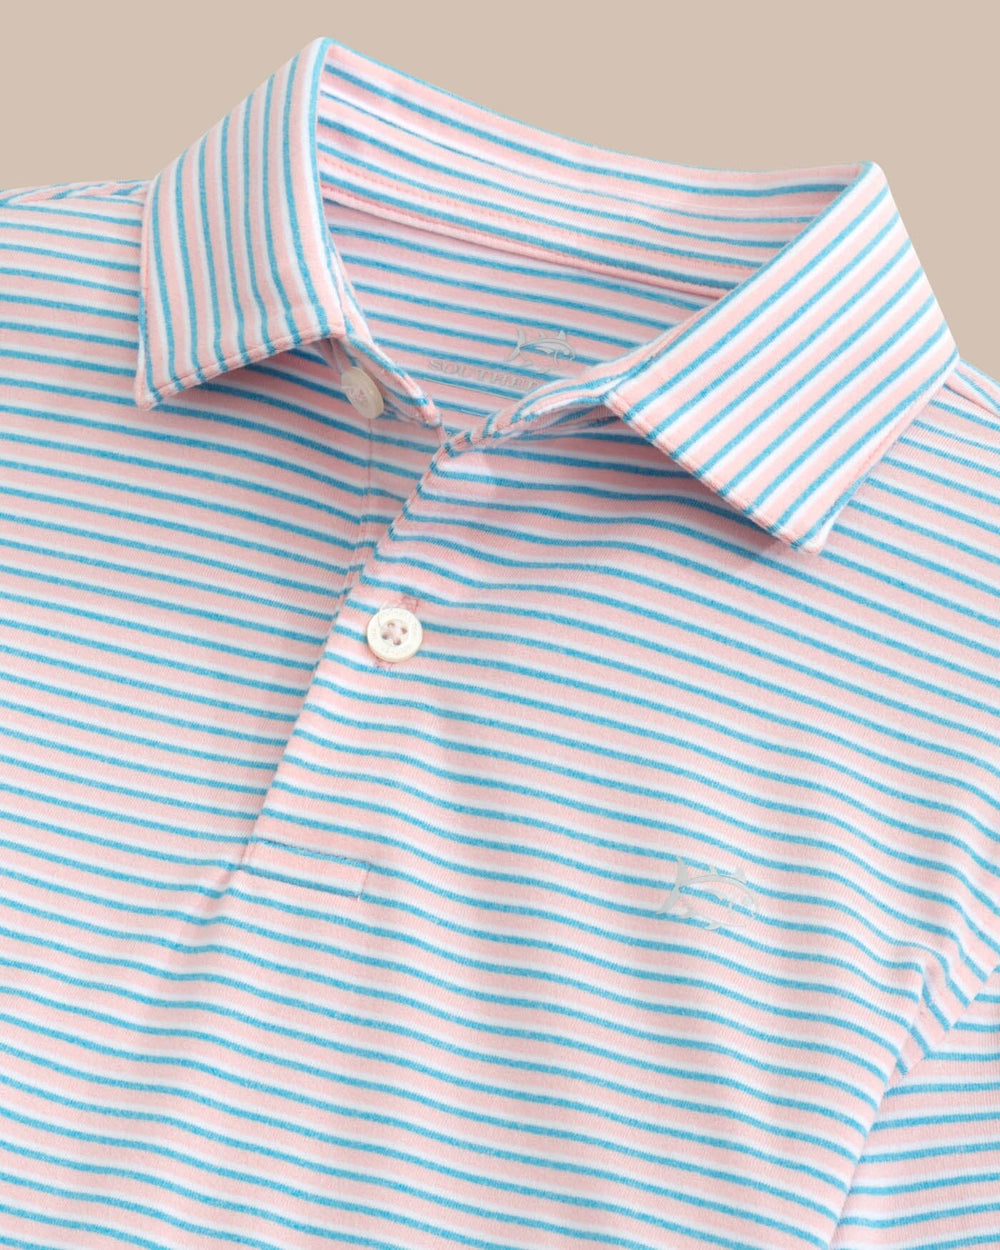 The detail view of the Southern Tide Kids Ryder Heather Halls Stripe Performance Polo by Southern Tide - Heather Pale Rosette Pink